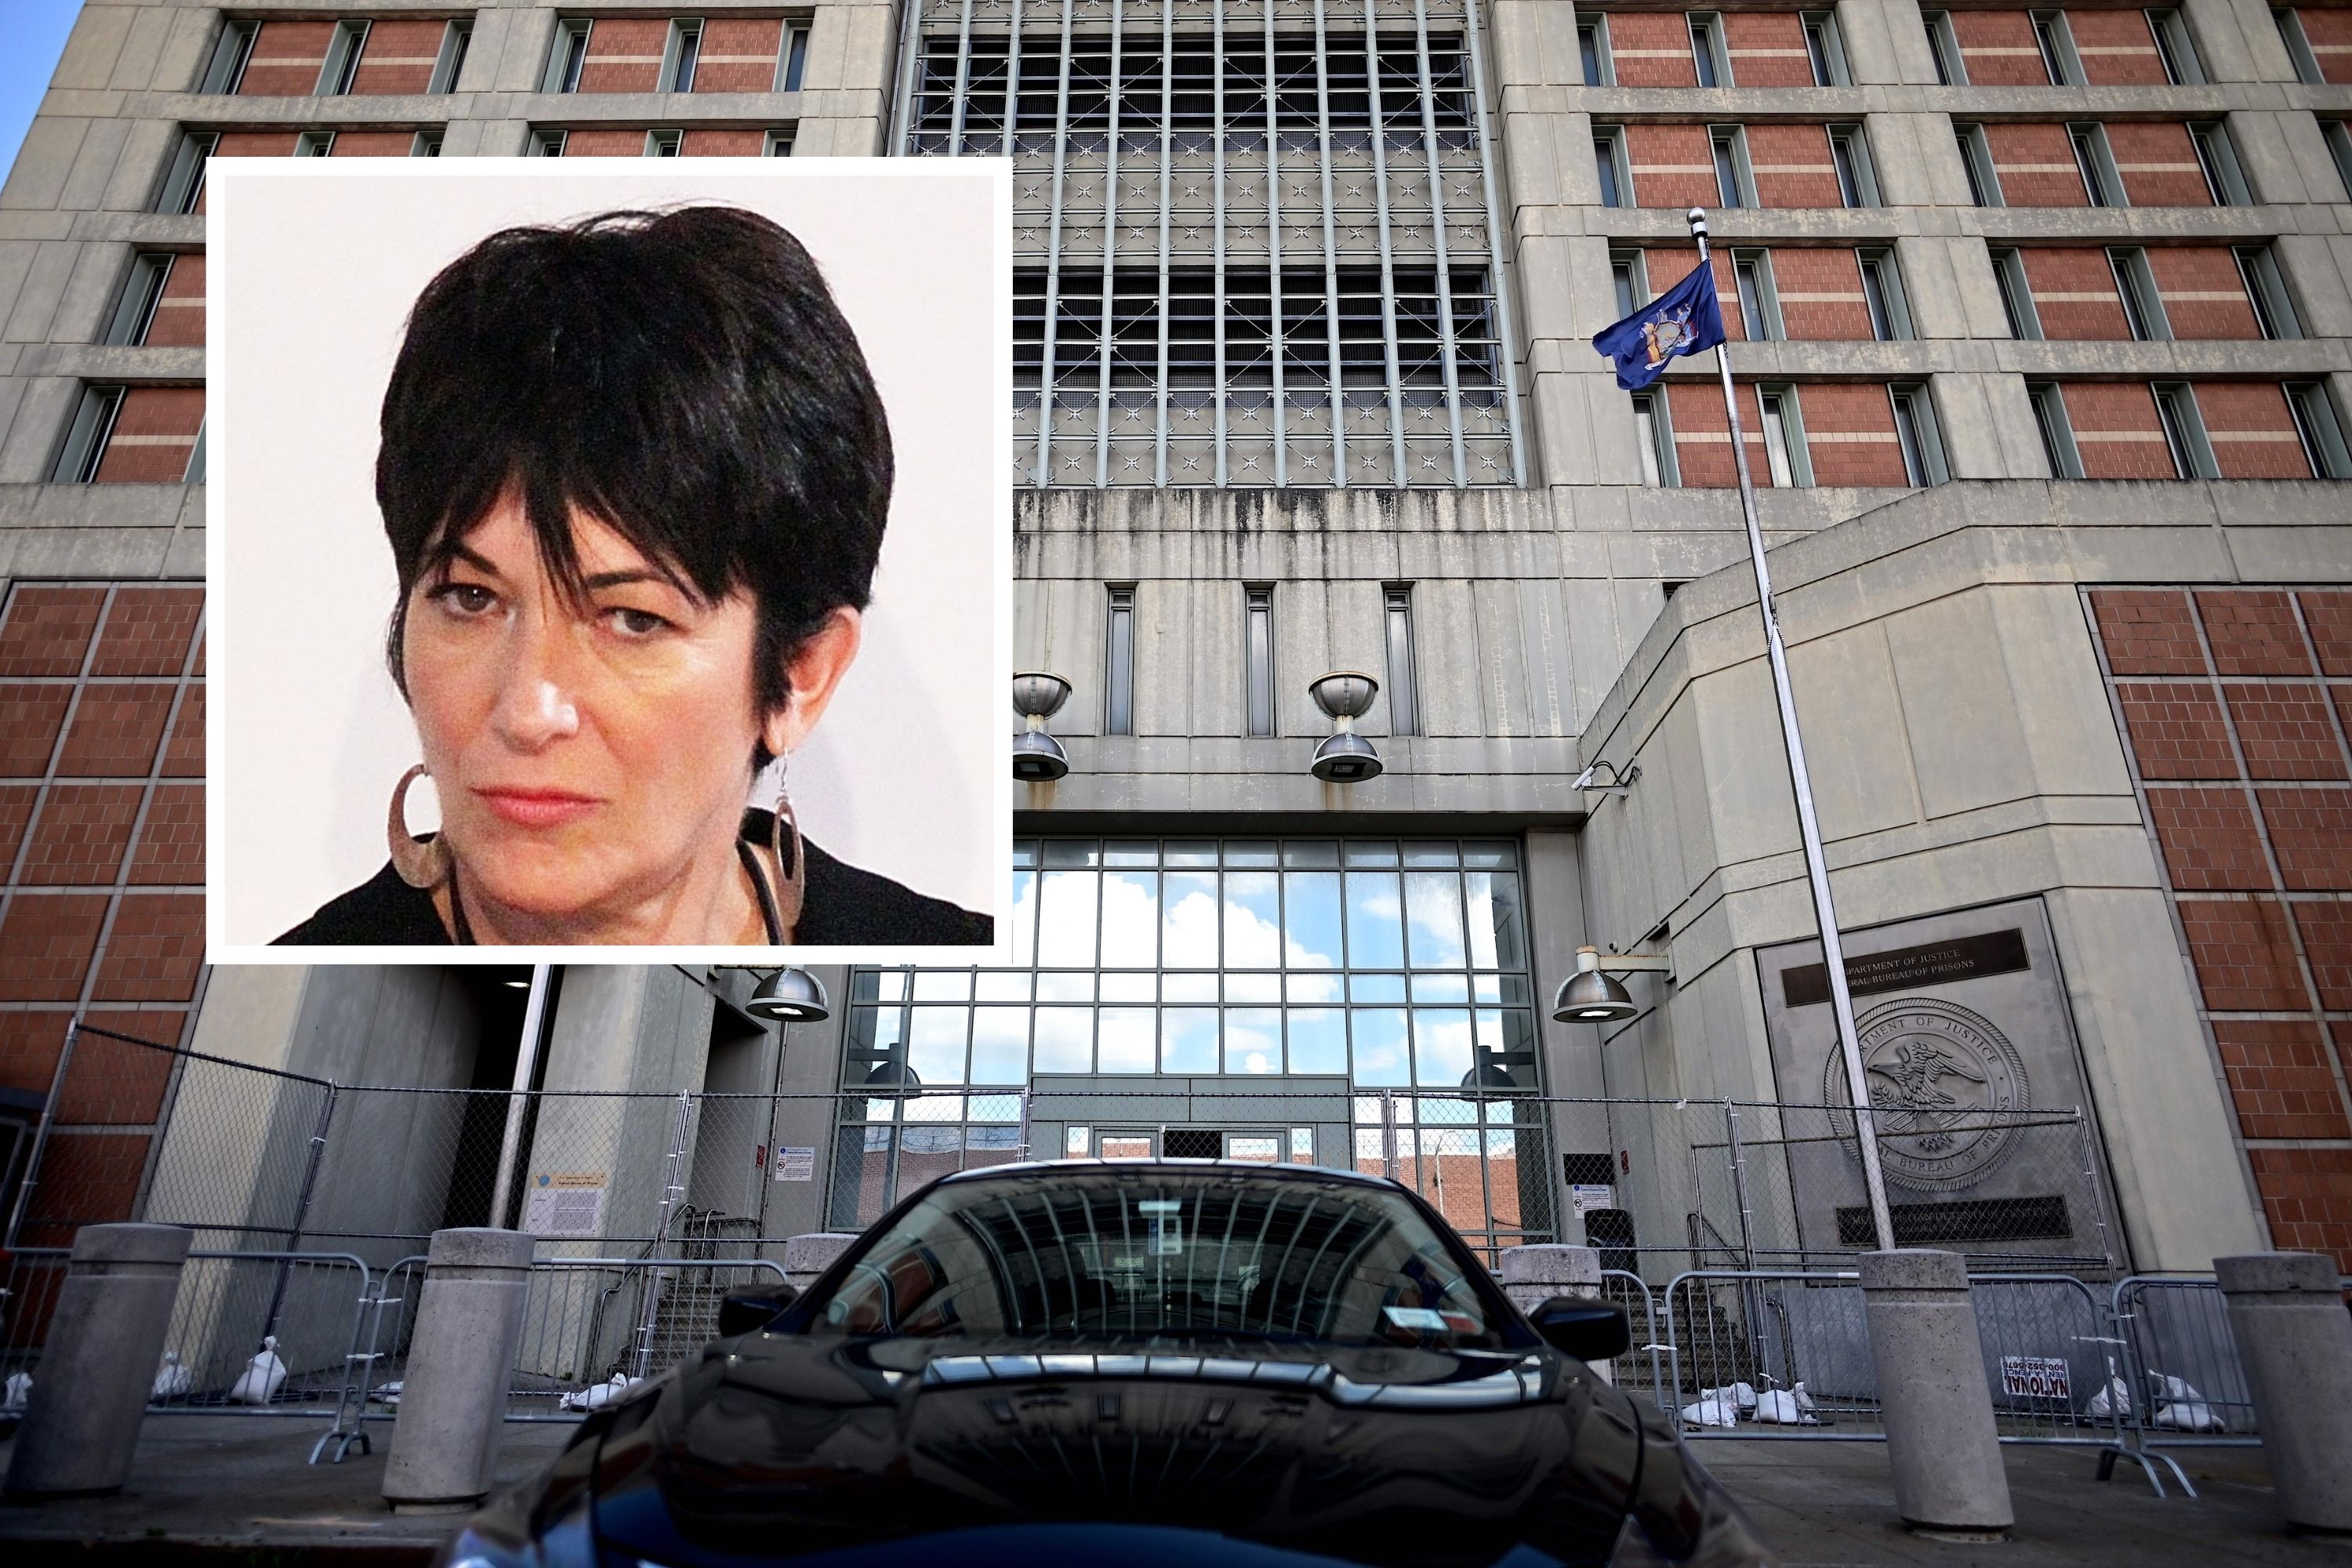 Ghislaine Maxwell Jailed for 20 Years After Grooming Girls for Epstein